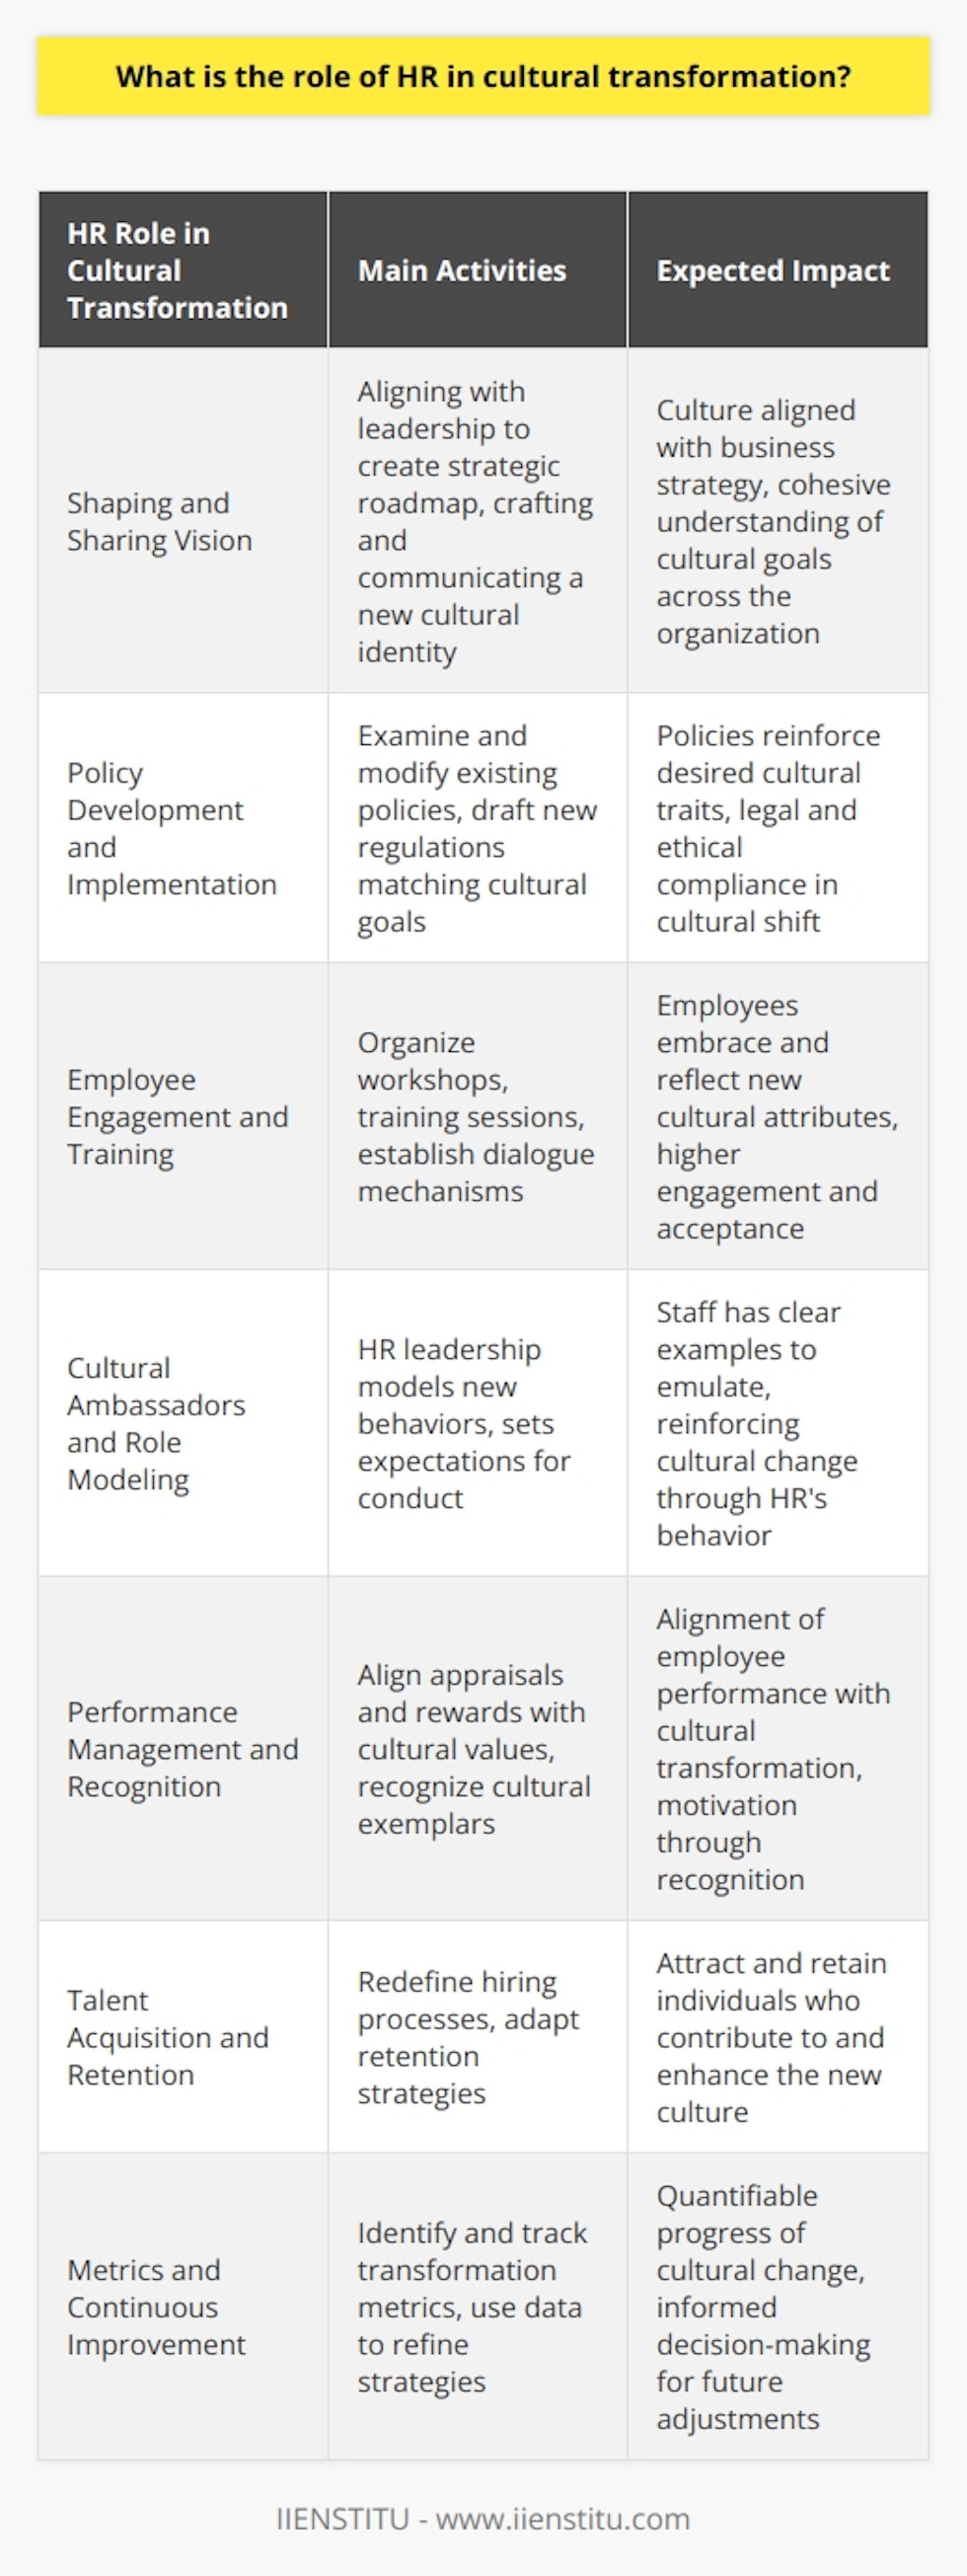 The Human Resources (HR) department is pivotal in steering cultural transformation within a company. This transformative process often starts at the strategic level with the leadership's vision; however, the anchoring and propagation of this shift heavily rely on HR's ability to translate vision into practice.**Shaping and Sharing Vision**HR's first role in cultural transformation is to shape and share the leadership's vision throughout the organization. By aligning with leadership, HR professionals can create a strategic roadmap that illustrates how the cultural change aligns with business goals and why it is critical to the organization's success. This involves crafting a compelling narrative that integrates the new culture into the company's identity and communicates it clearly and persuasively to all stakeholders.**Policy Development and Implementation**HR must create or modify company policies to embody the transformed culture. HR professionals examine existing policies to ensure they dovetail with the new cultural ethos. They are in charge of drafting and administering new regulations that foster the desired cultural traits and behaviors. Key areas of focus can include diversity and inclusion initiatives, flexible working arrangements, and performance review systems that measure not only what is achieved but also how it aligns with cultural values.**Employee Engagement and Training**Managing the cultural transformation requires HR to deeply engage with employees. HR can organize workshops, training sessions, and interactive modules that help employees understand and embrace the new cultural elements. This education process empowers staff members to embody and reflect the cultural attributes in their daily work. HR also establishes dialogue mechanisms to give employees a voice in the transformation process, which can boost acceptance and engagement.**Cultural Ambassadors and Role Modeling**HR must lead by example, becoming cultural ambassadors that model the behavioral changes expected in the new company culture. HR leaders and professionals can demonstrate these behaviors in their interactions, decisions, and the way they manage HR processes, thereby setting expectations and providing a template for others to follow.**Performance Management and Recognition**Effective cultural transformation often involves integrating the new values into performance management systems. HR ensures that employee appraisals, promotions, and rewards are aligned with the cultural goals, thereby reinforcing desired behaviors and outcomes. By recognizing and rewarding those who exemplify the new culture, HR sends clear signals about what is valued within the company.**Talent Acquisition and Retention**HR's role extends to redefining the talent acquisition process to attract individuals who are aligned with the transformed culture. This involves portraying the company's cultural journey in employer branding, revising job descriptions, and tailoring interviewing techniques to identify candidates who will thrive in the new environment. Simultaneously, retention strategies are adapted to nurture and keep talent that contributes positively to the cultural ecosystem.**Metrics and Continuous Improvement**Finally, HR must identify metrics to measure the progress of the cultural transformation. These metrics, which can be quantitative and qualitative, allow HR to track change over time, identify areas for improvement, and present evidence of success. This data-driven approach ensures that the transformation is not only felt but also quantified, allowing leadership and HR to refine their strategies continually.In the dynamic landscape of organizational change, the role of HR in cultural transformation is both extensive and essential. By guiding policy development, engaging employees, modeling behaviors, managing performance, and refining talent strategies, HR acts as both the architect and the builder of the new cultural edifice, playing an integral role in the ongoing evolution of the company into a more effective and cohesive entity.